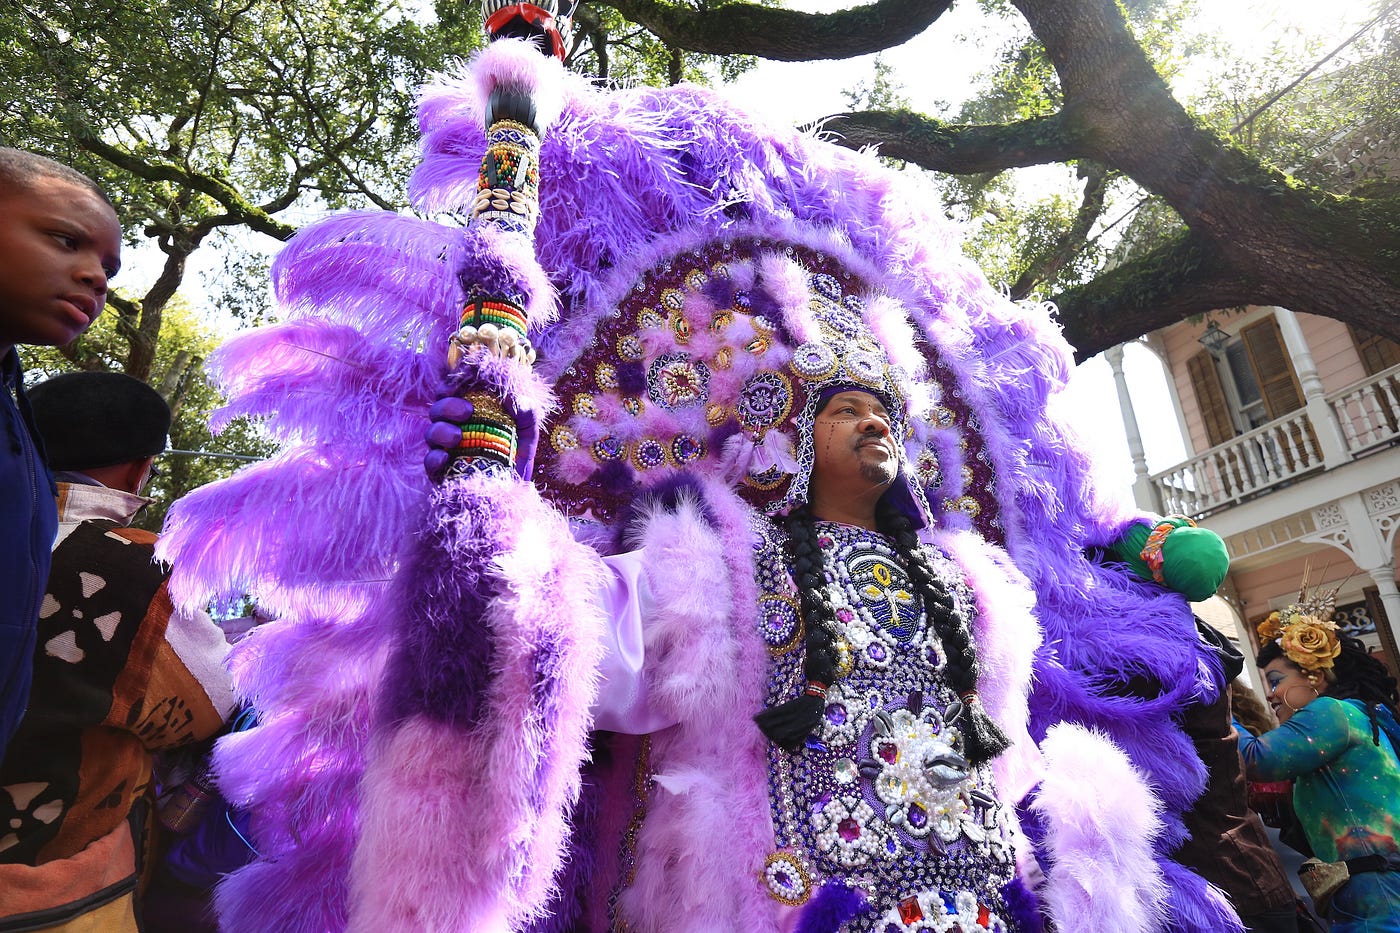 Majestic Mardi Gras Indians and a Treme Block Party in New Orleans